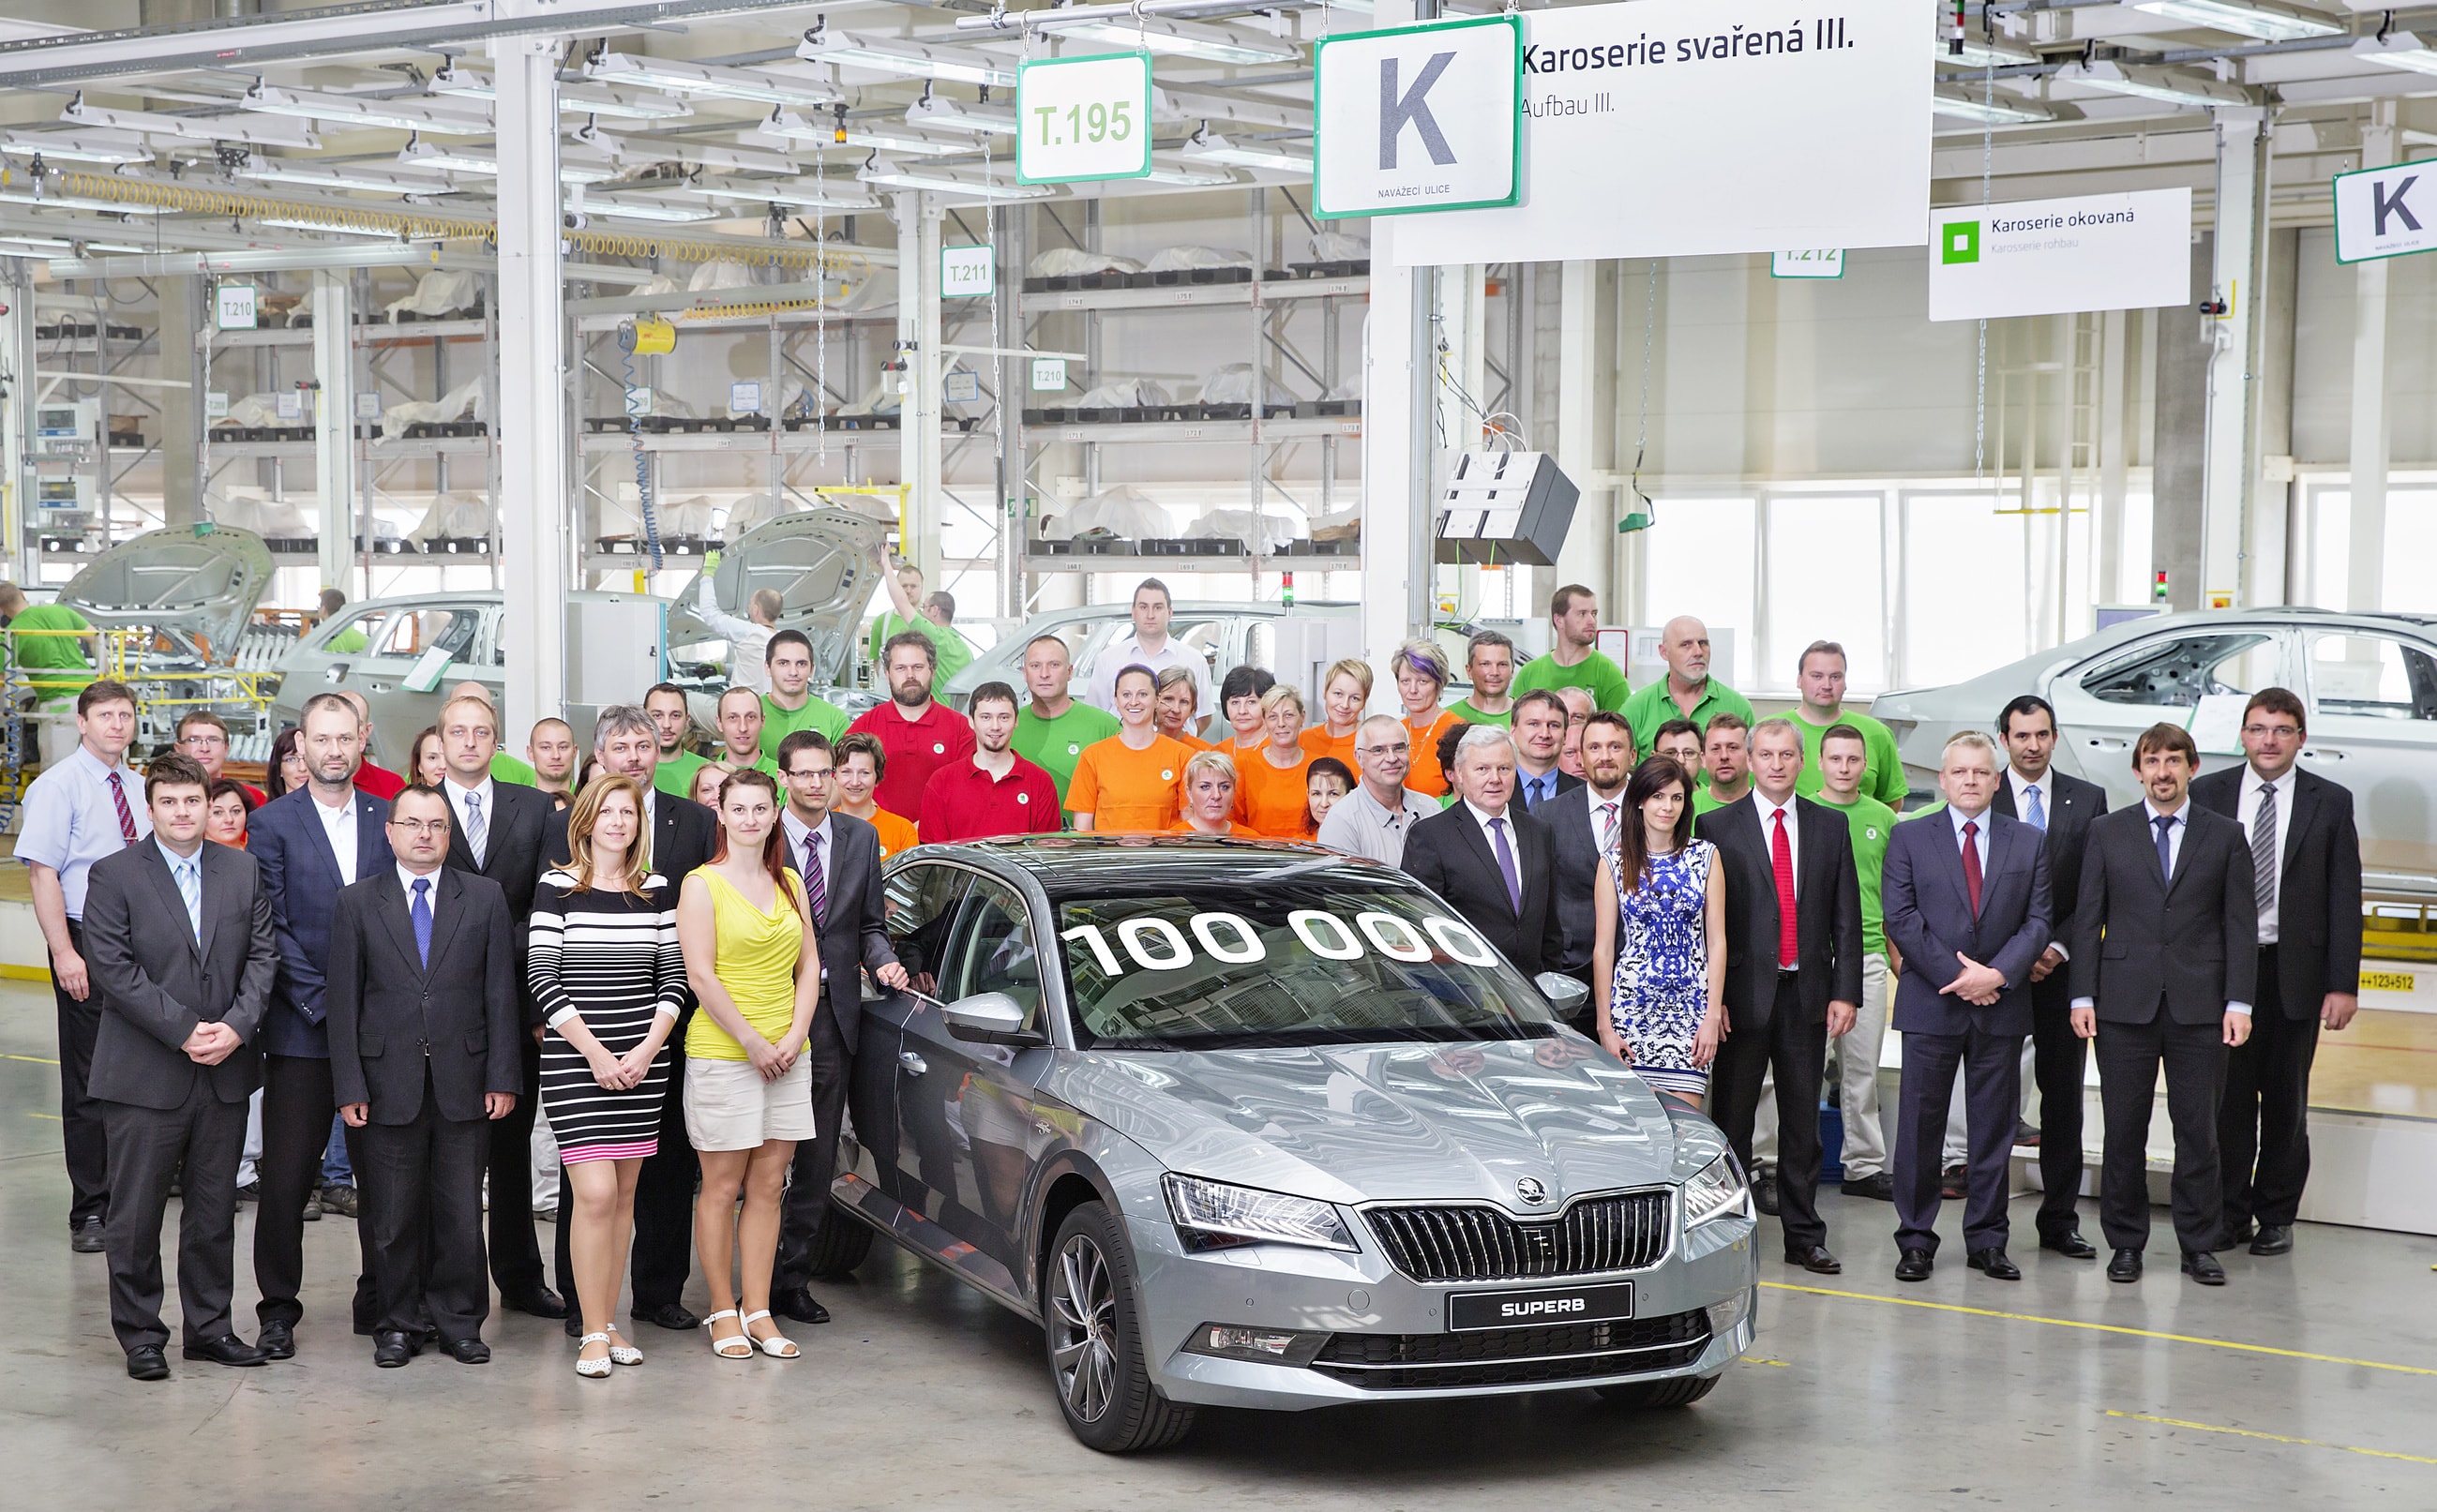 skoda-has-produced-100000-units-of-the-t